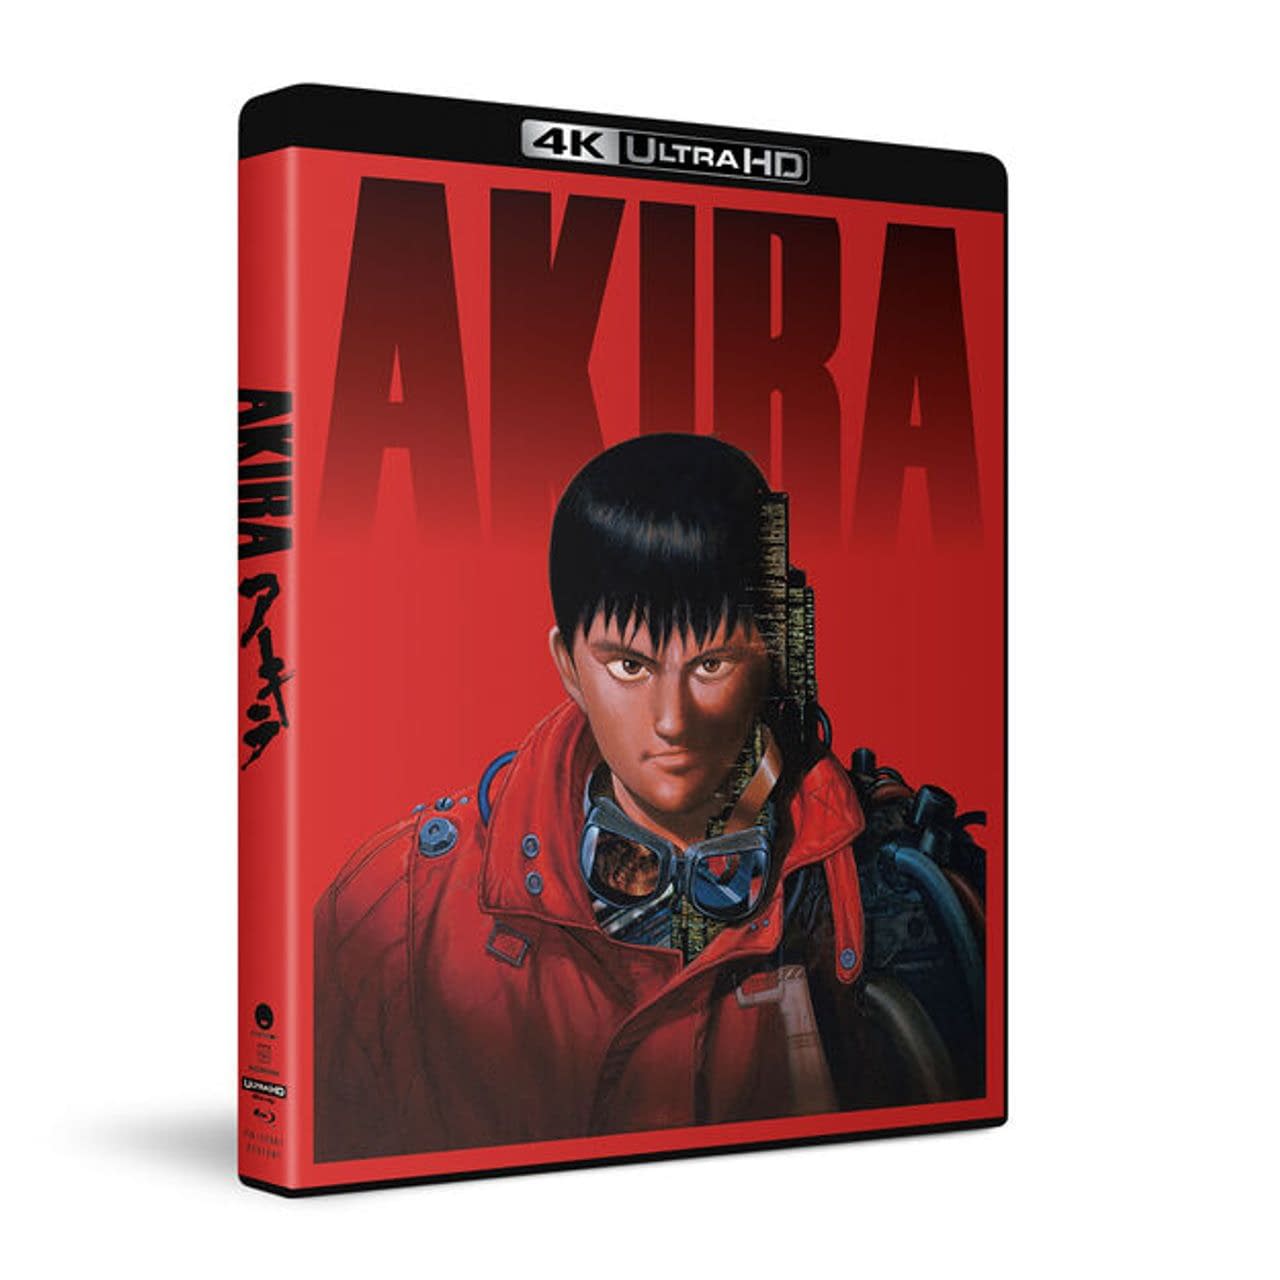 Akira 4K UHD BluRay Coming from Funimation in January 2022